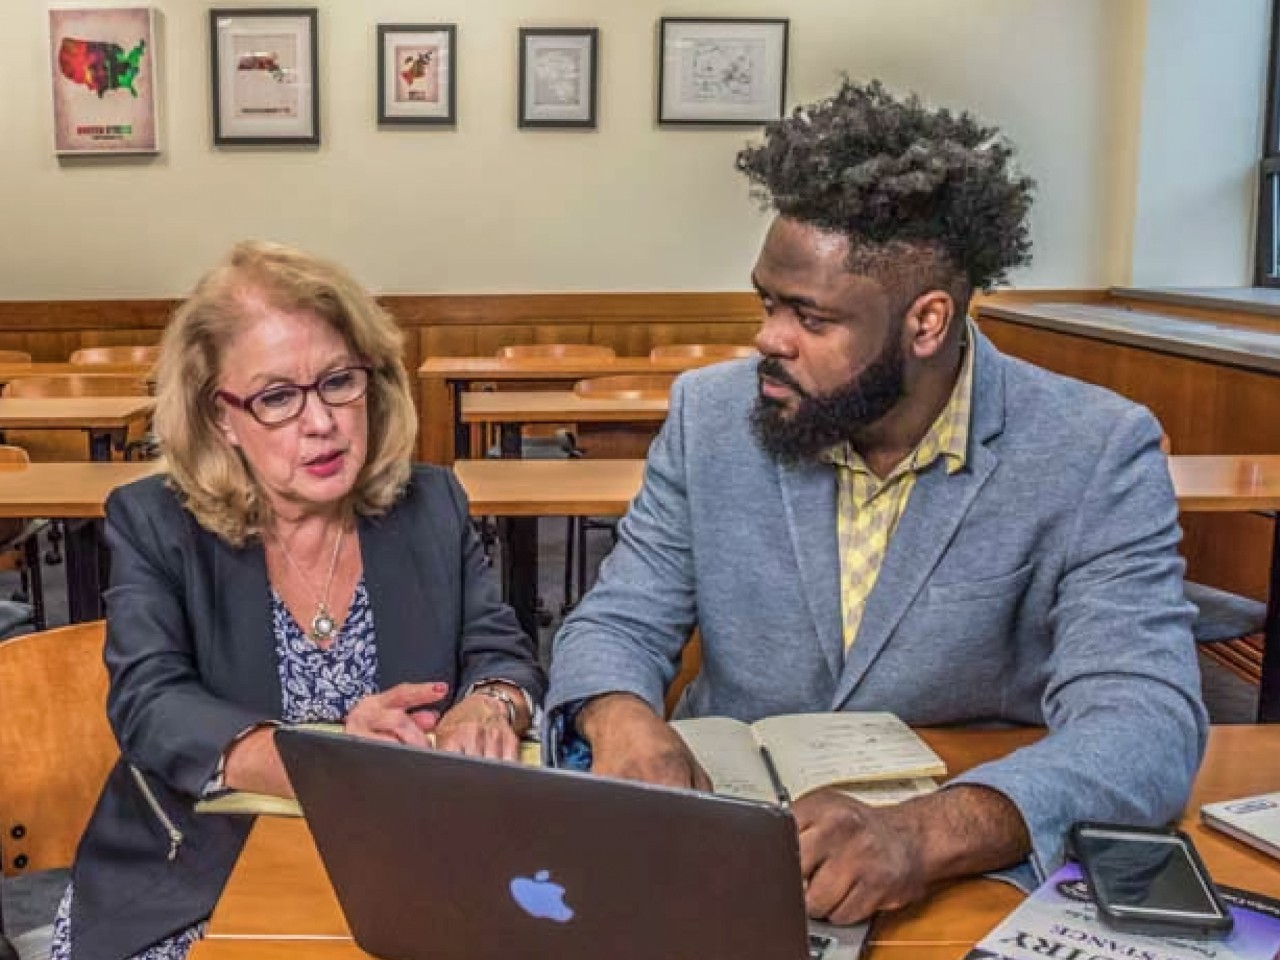 Cawthorne Professor Marilyn Cochran-Smith and doctoral student Shawn Savage